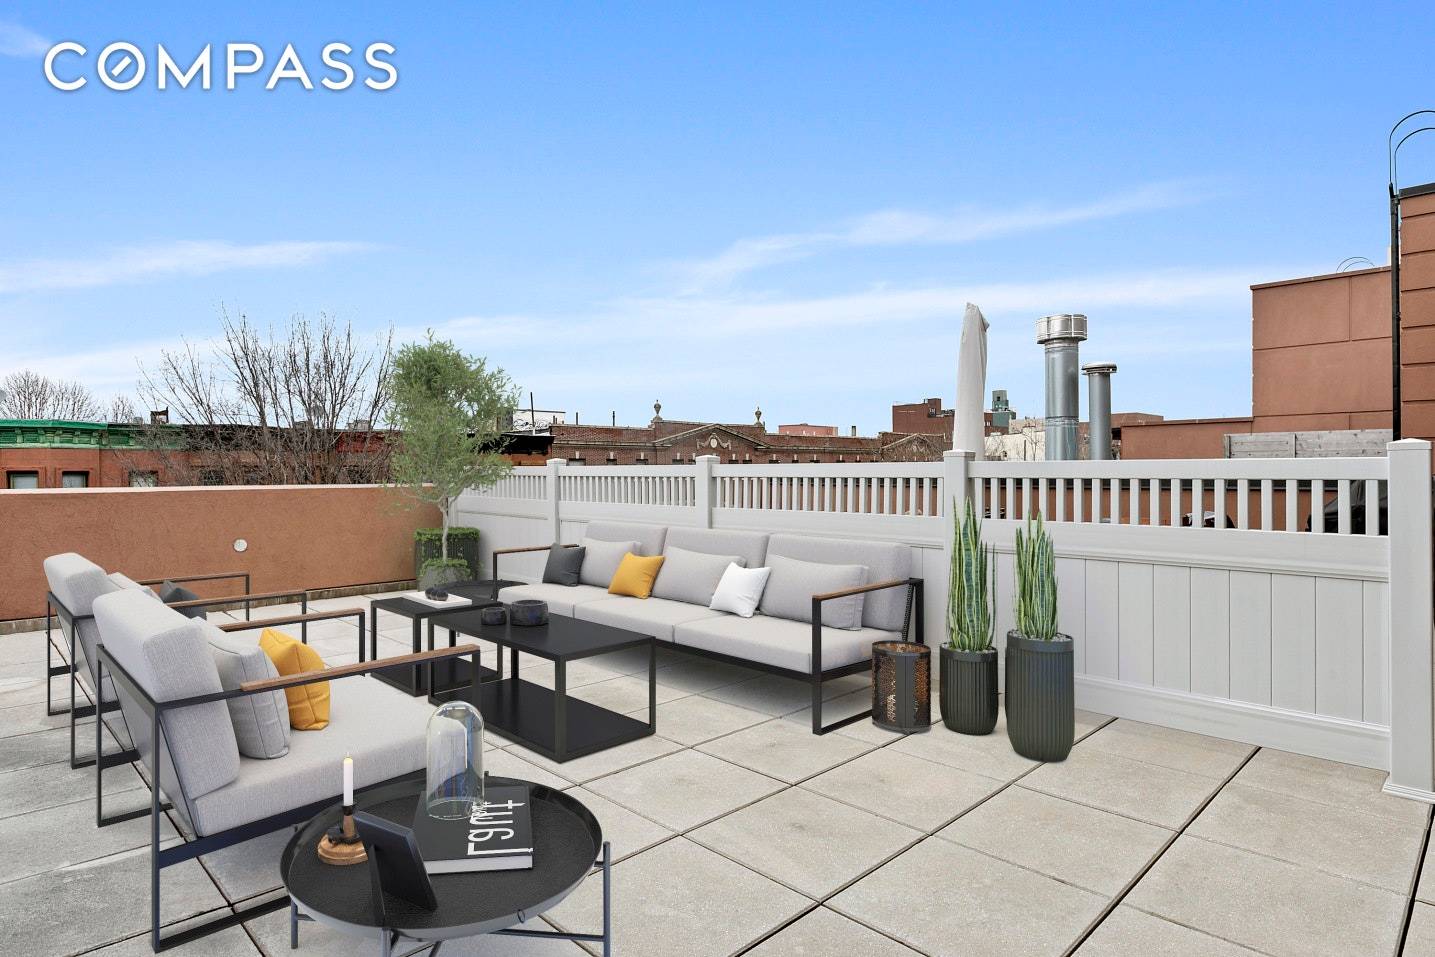 84 Lefferts Place 3A is a dramatic, sun filled duplex with not one but TWO PRIVATE TERRACES totaling over 600 sqft.